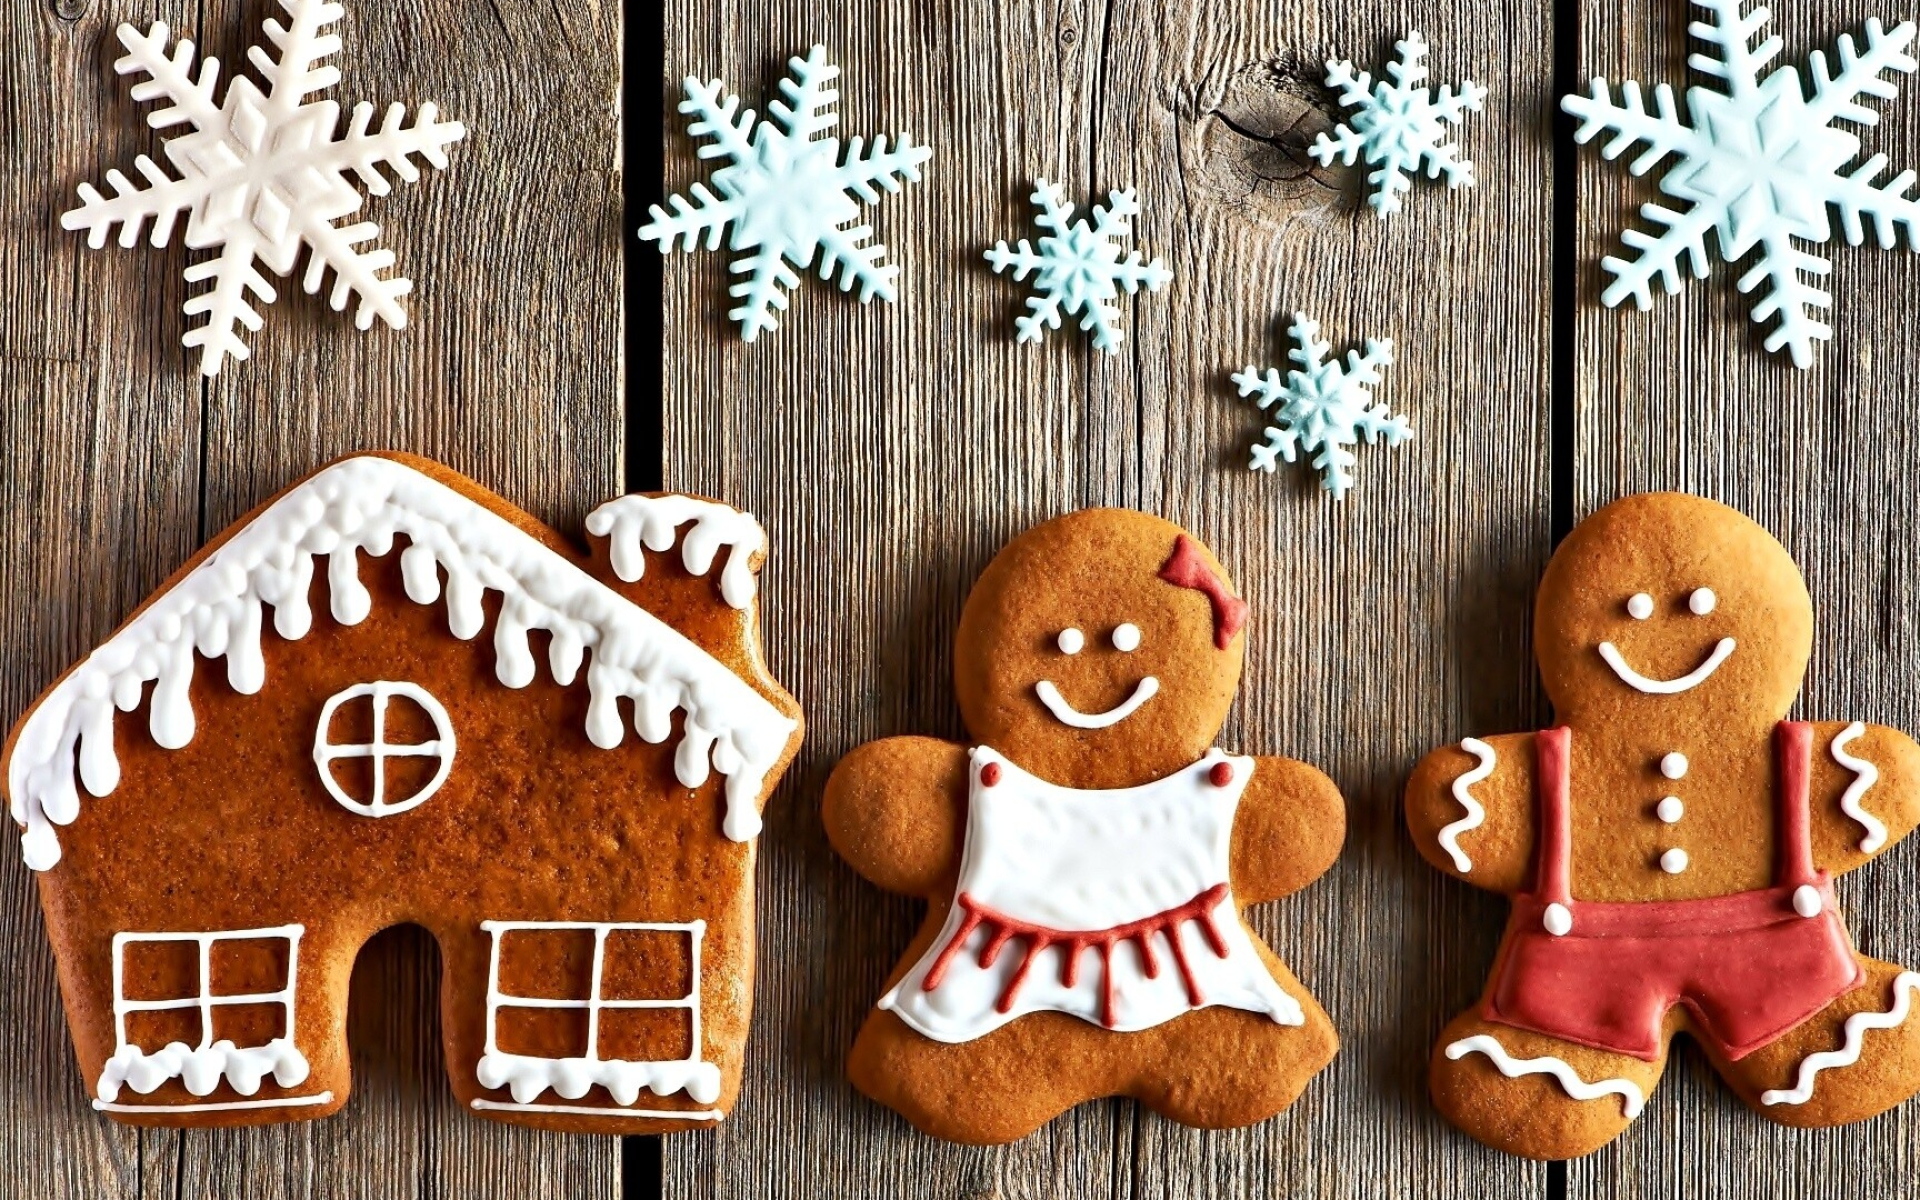 Gingerbread House: Classic ginger cookies baked in cinnamon sugar, Intricately piped icing decorations, Snowflakes. 1920x1200 HD Background.